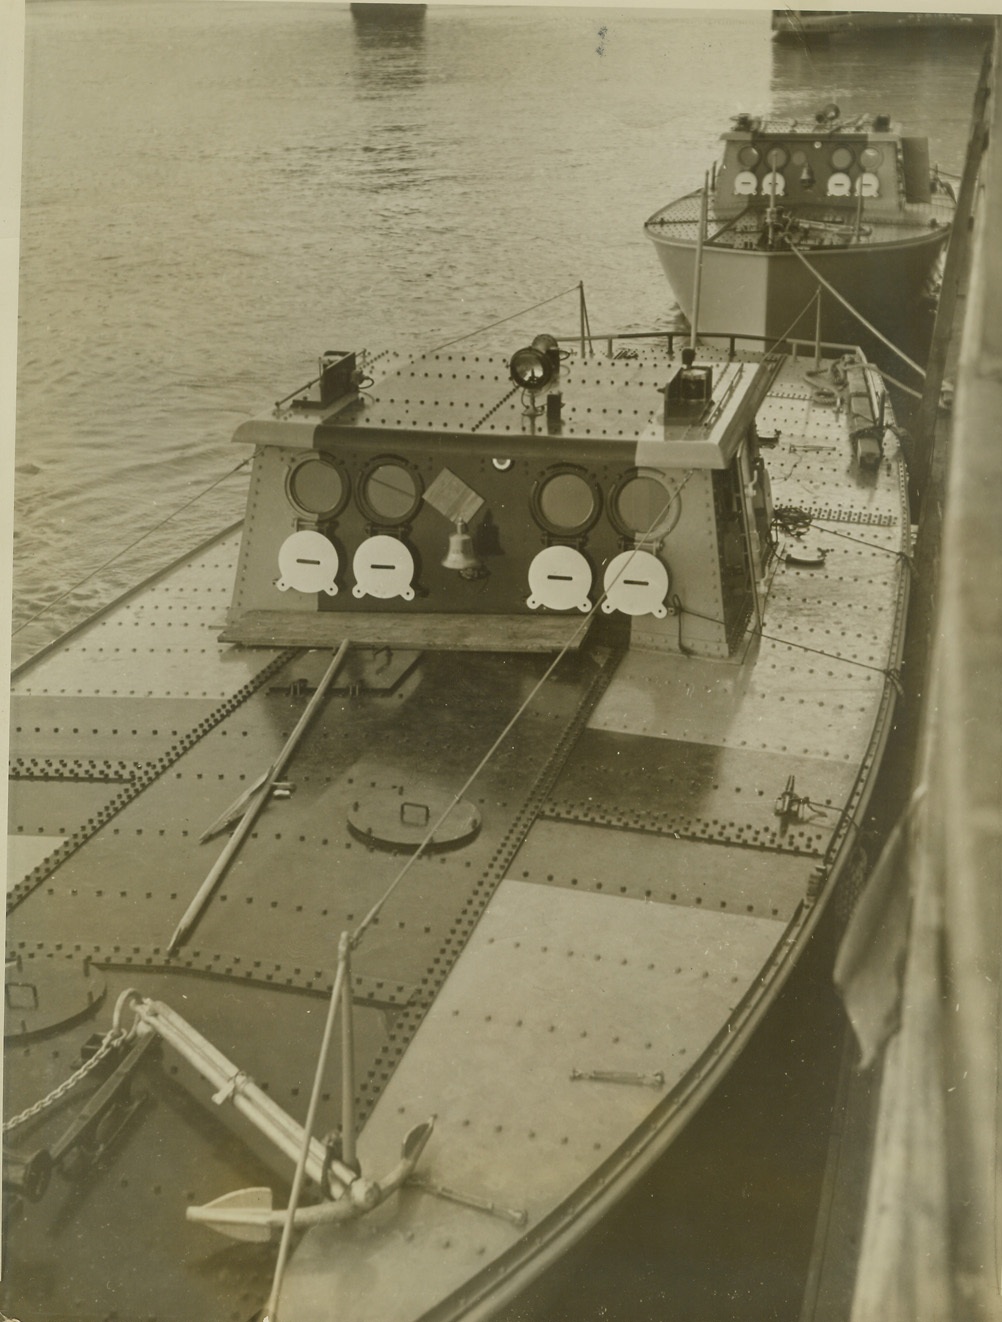 TARGETS FOR DIVE BOMBERS, 1/5/41  ST. LOUIS, MO. – Armored gasoline powered target boats tied up in St. Louis, enroute from Great Lakes Training Station to join naval units in Gulf of Mexico. Black stripe down center of boats are bulls eyes for dive bombers which use the boats as live targets during practice. Although planes use Non penetrating bombs operators of targets have feeling of mouse waiting for cat to pounce. Credit: OWI Radiophoto from ACME;